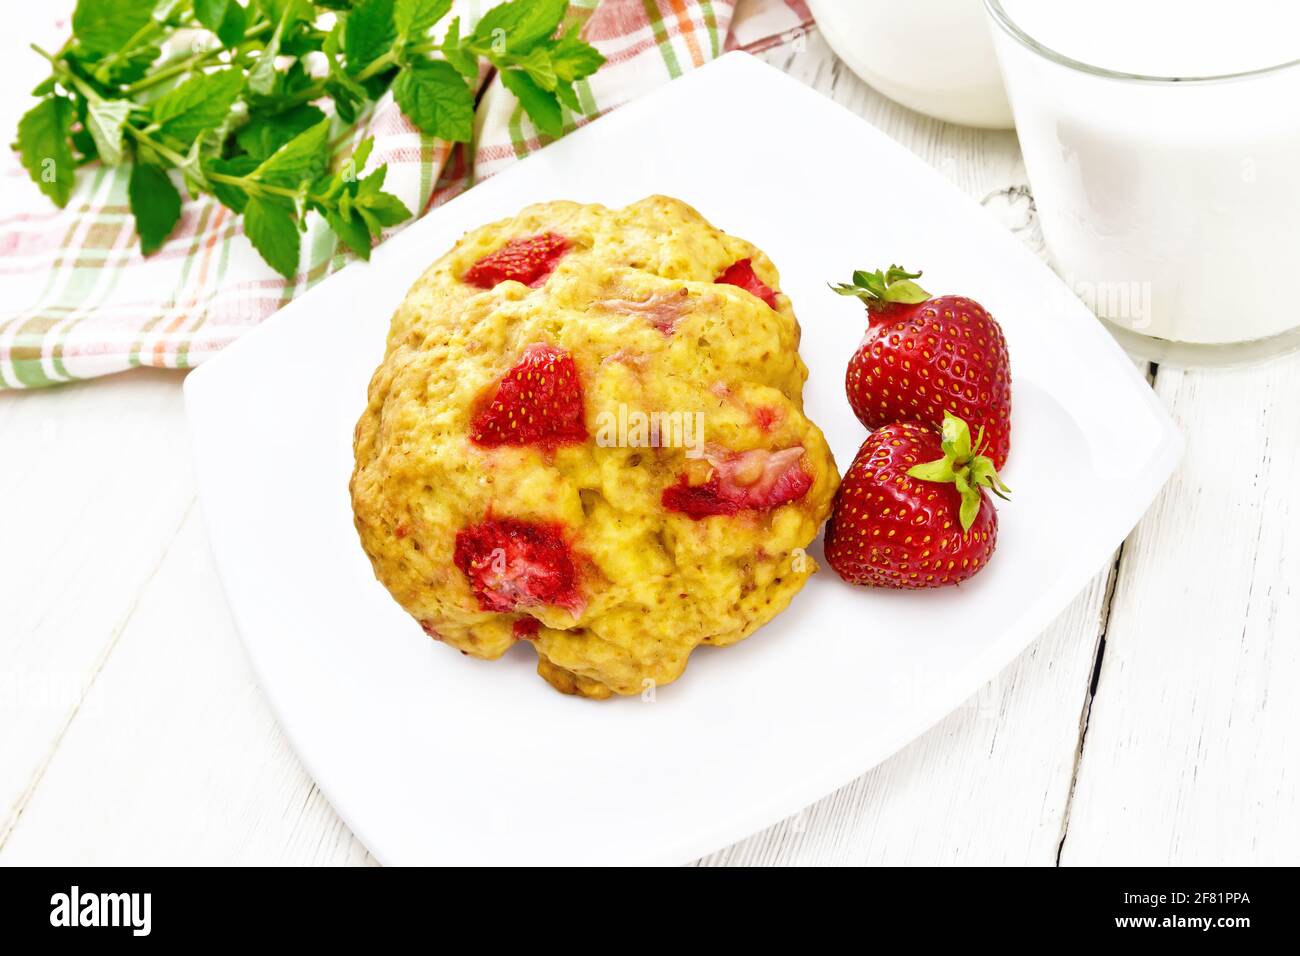 Strawberry scones in a plate with berries, a towel, mint, milk in jug and glass on wooden board background Stock Photo